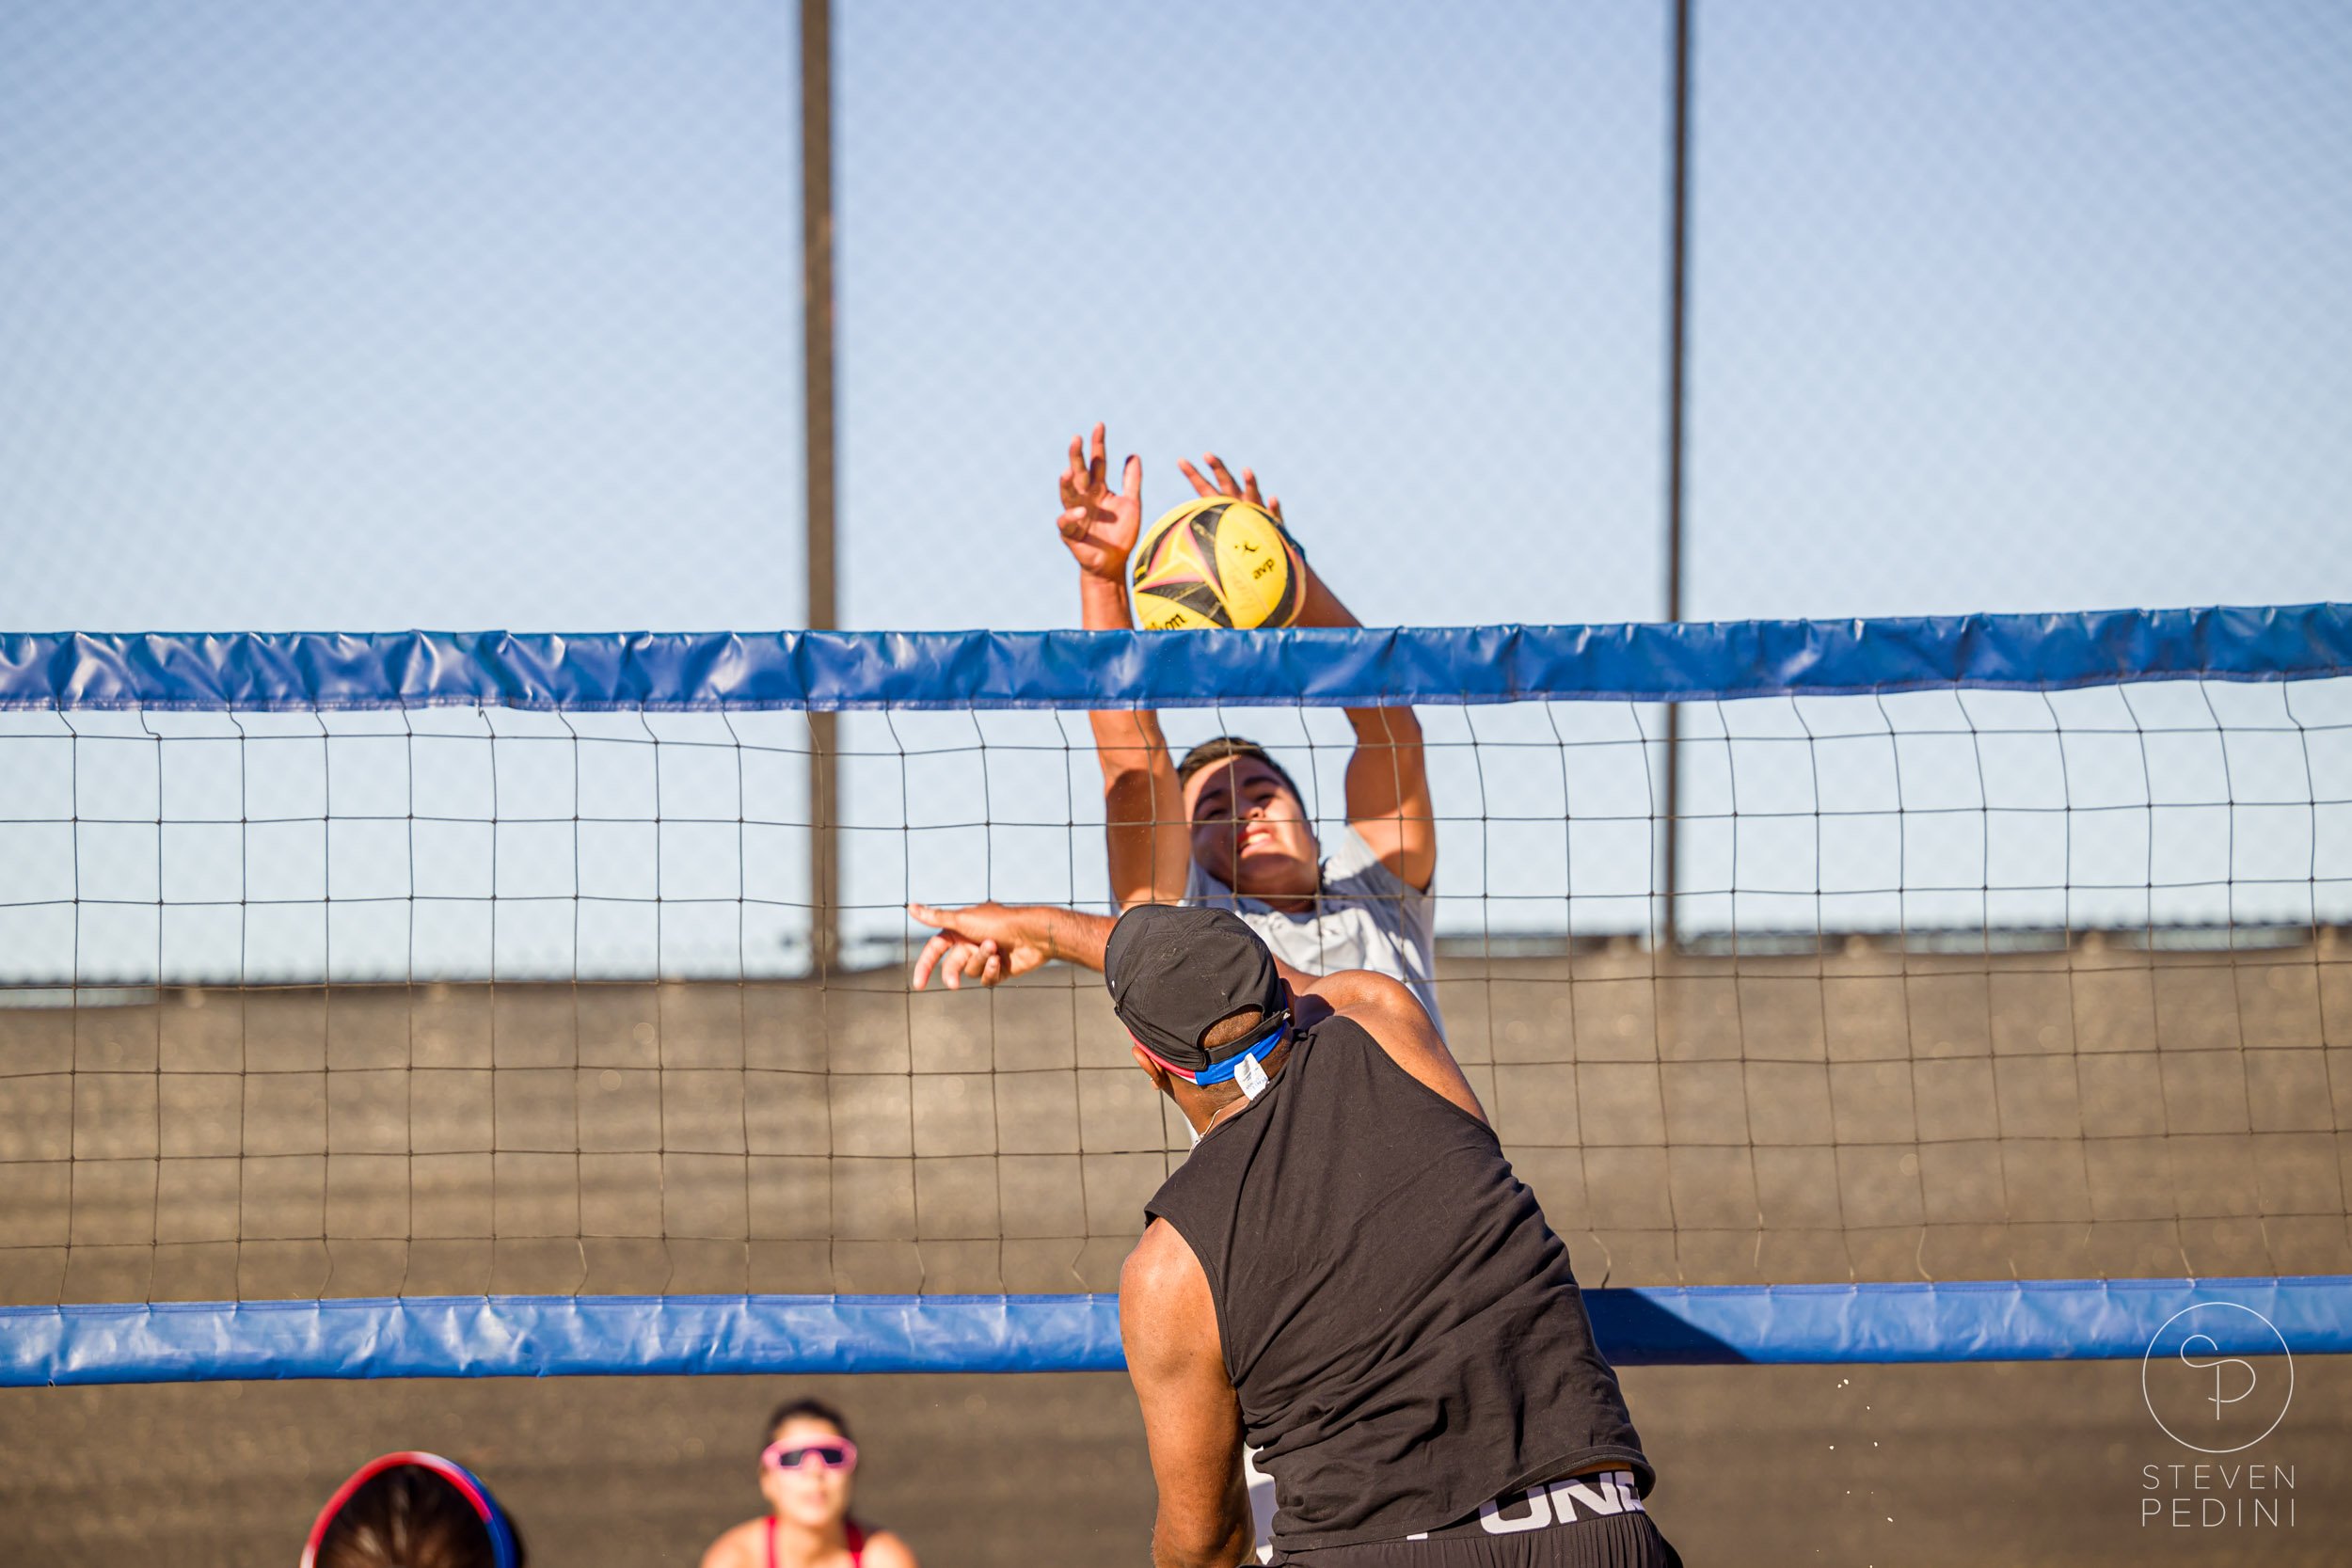 Steven Pedini Photography - Bumpy Pickle - Sand Volleyball - Houston TX - World Cup of Volleyball - 00049.jpg